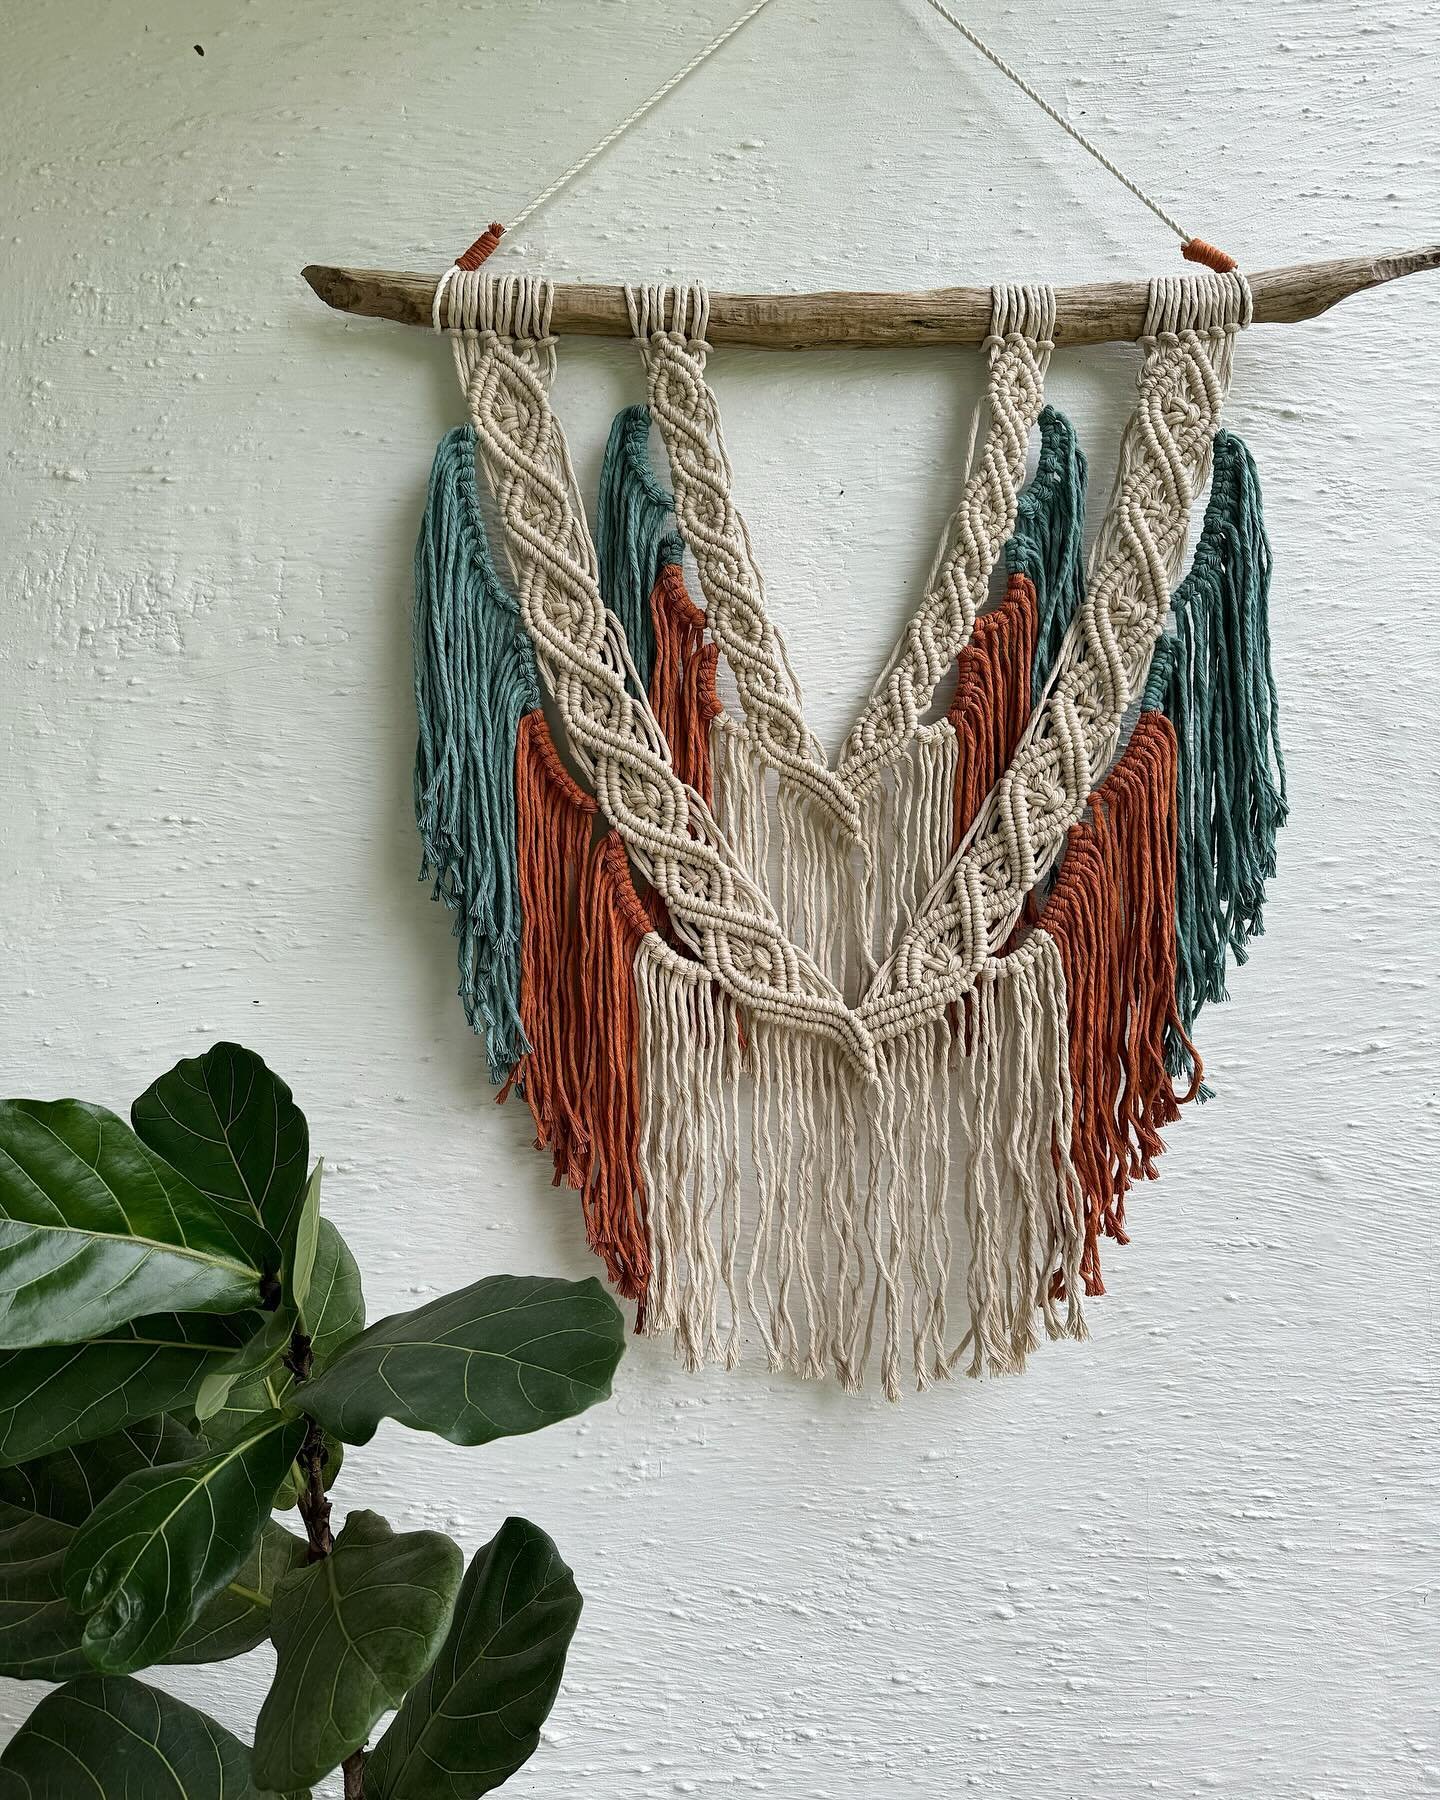 🌊🧡Custom Made🧡🌊

This beauty is finished and heading to its new home today. The customer wanted a combination of my Changing Colors Tapestry and my Ocean Sunset Tapestry, and I knew immediately this was going to be a fun project! What do you thin